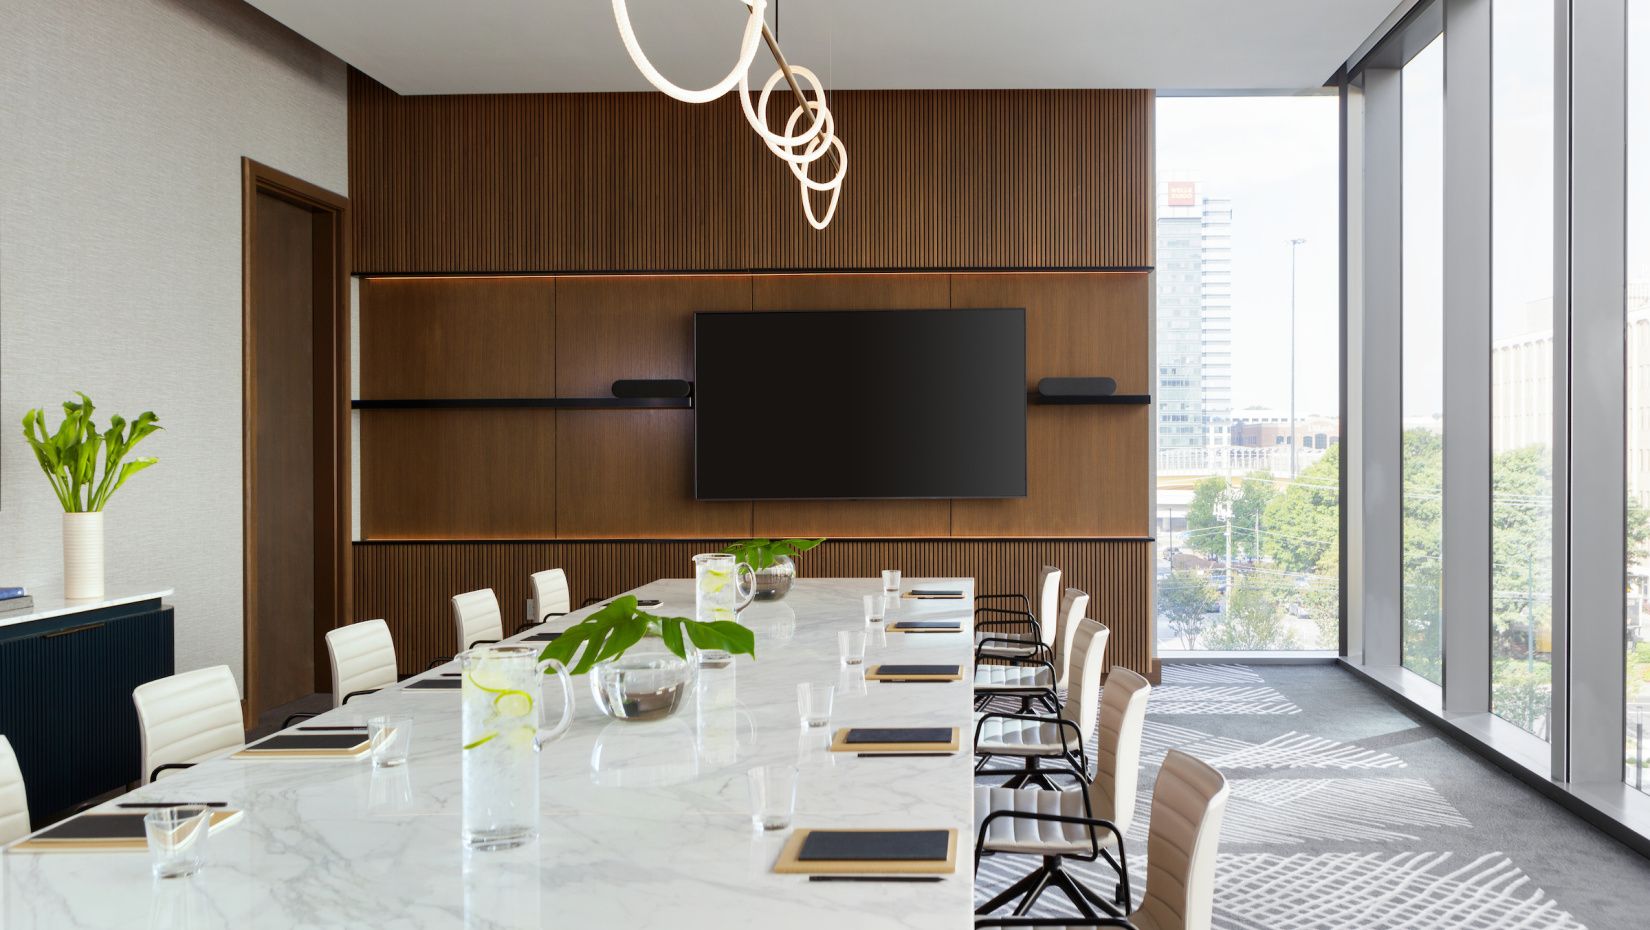 kimpton meeting room with white boardroom photo and large windows